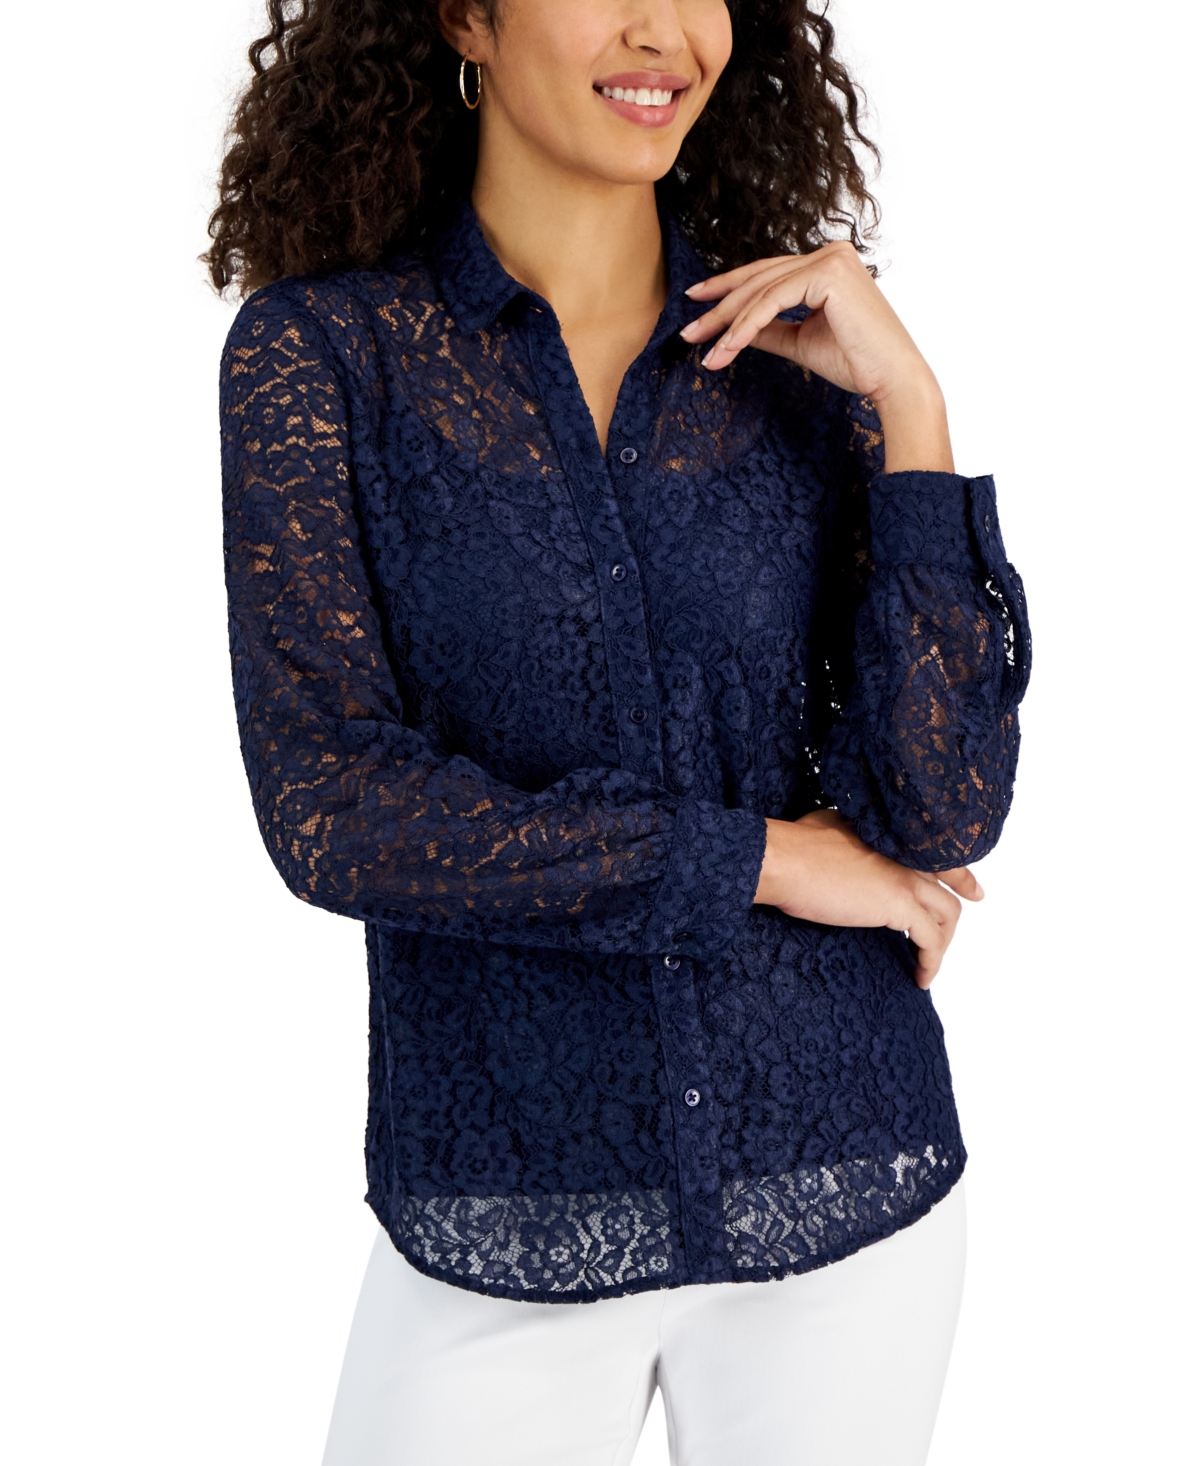 Petite Lace Camisole-Lined Blouse, Created for Macy's - Intrepid Blue